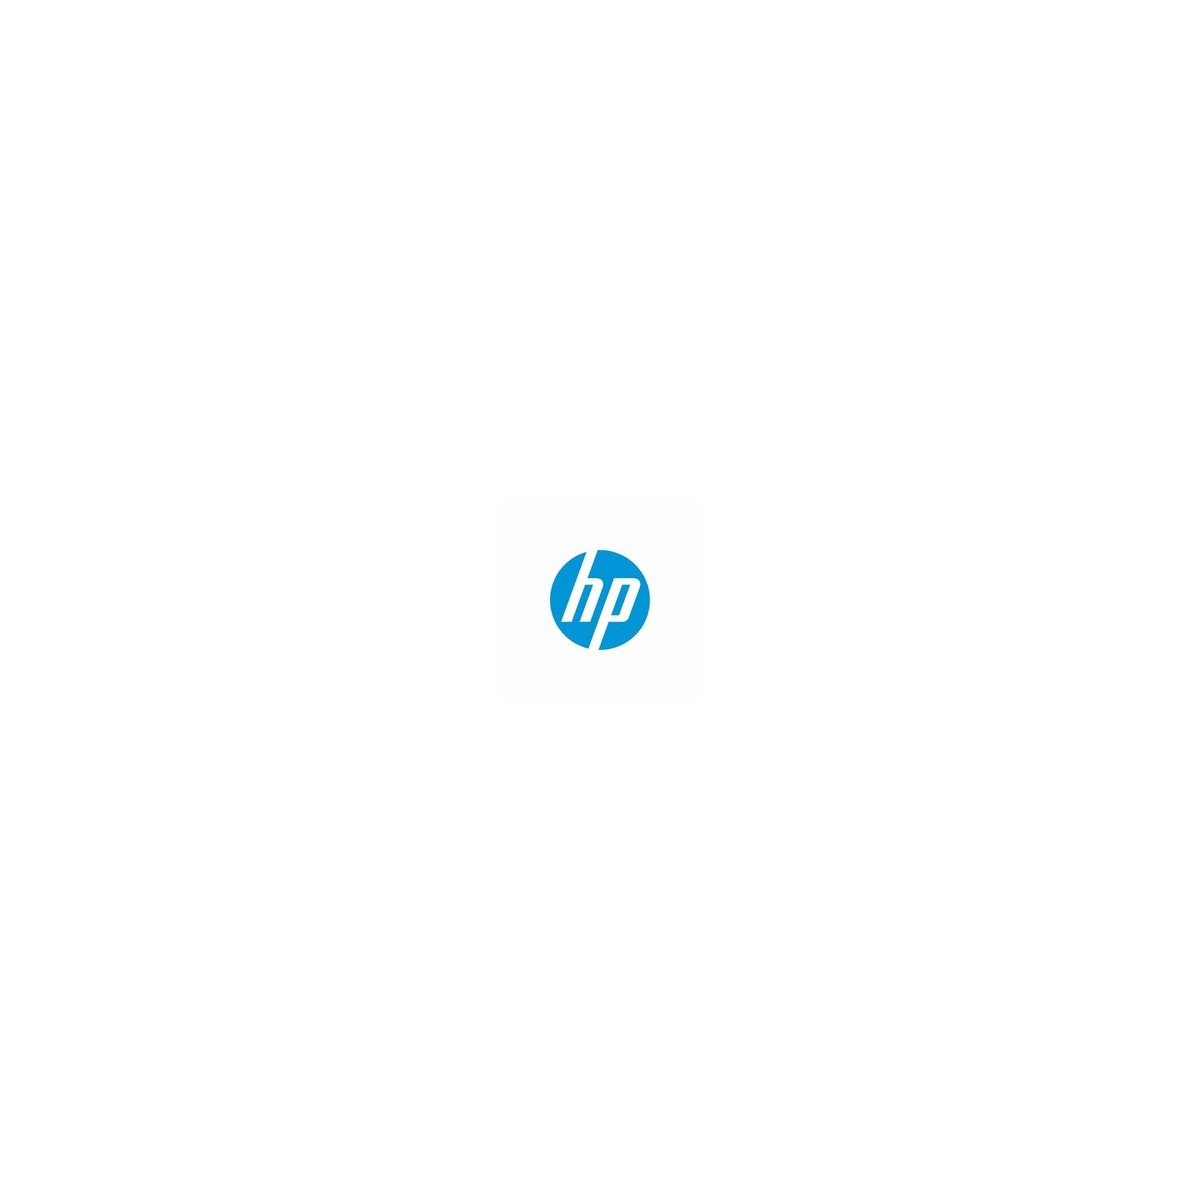 HP 25X - 34500 pages - Black - 1 pc(s)